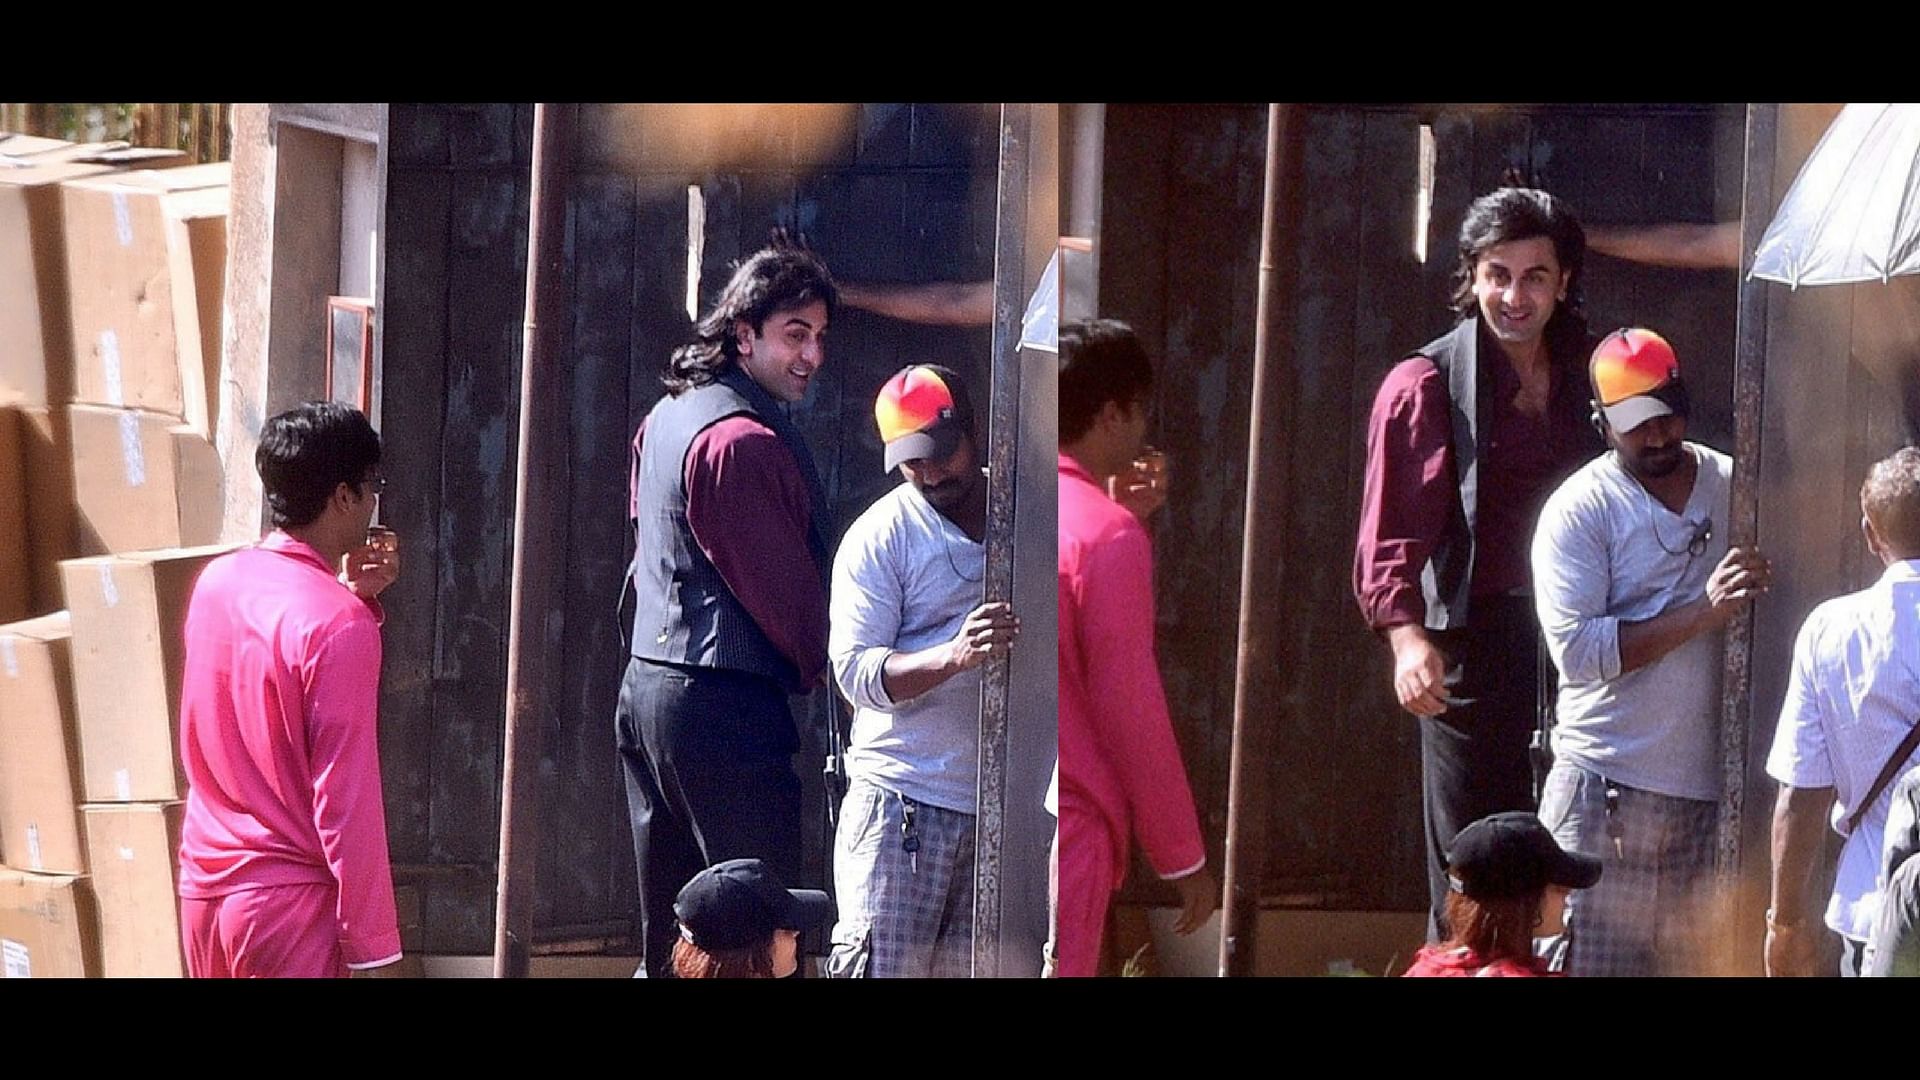 Pictures of Ranbir Kapoor shooting for the Sanjay Dutt biopic have come up on social media. (Photo courtesy: Twitter)